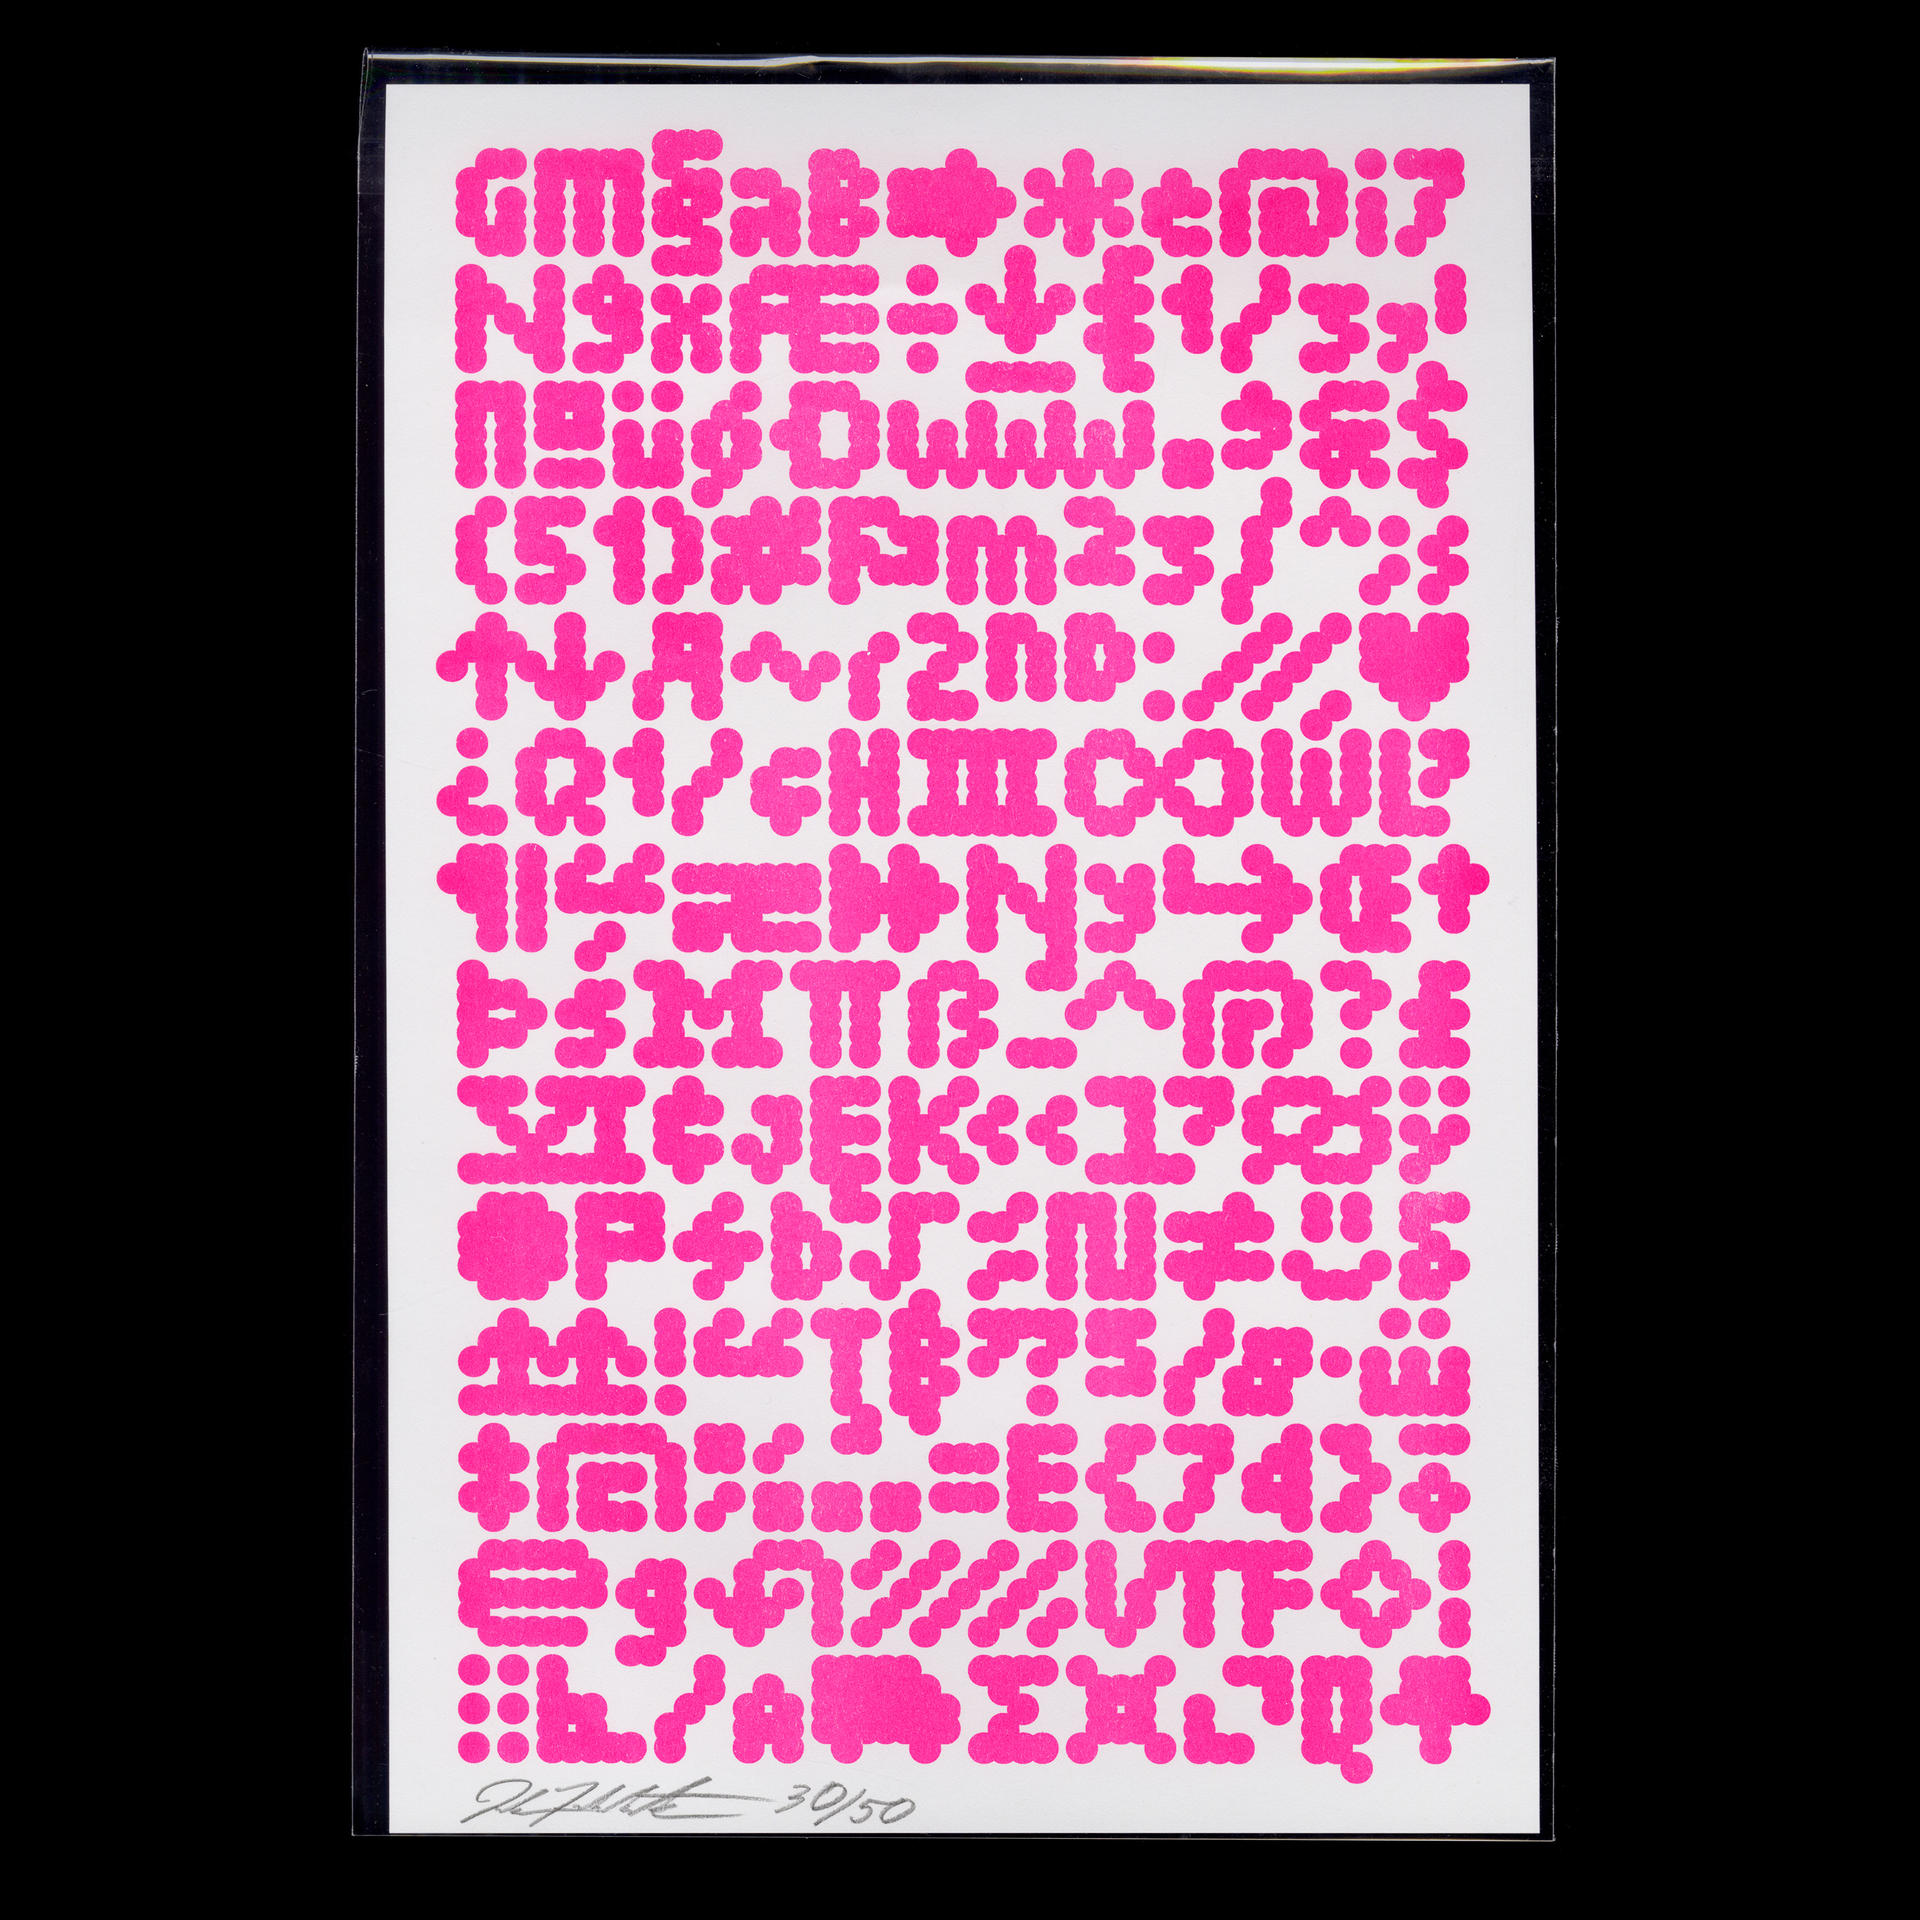 Specimen poster for TINY (Today In New York), an open-source font